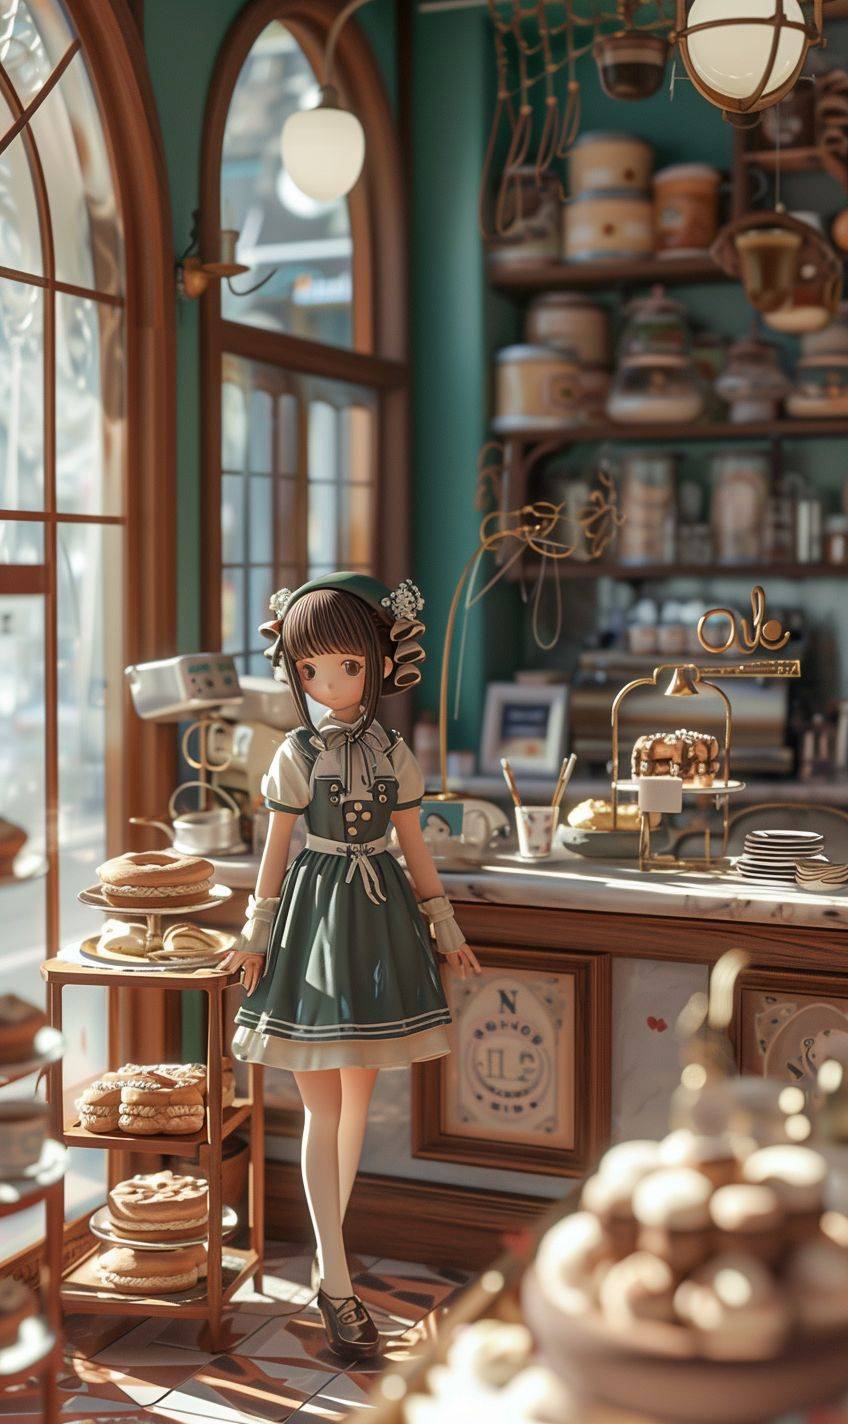 In a meticulously crafted miniature European-style café, the interior exudes a charming and delightful atmosphere. The café is adorned with stylish and adorable decor, creating a space that is both fashionable and cute. Delicate trinkets and decorations are scattered throughout, adding a touch of whimsy to the surroundings. The café is bustling with life, as a cute café attendant attends to the needs of a group of customers. Among them is an adorable cute teenage girl, enjoying her time in this picturesque setting. The café is bathed in soft spring light, casting a warm and inviting glow that complements the cheerful ambiance. The scene is a perfect blend of beauty and charm, capturing the essence of a delightful café experience. From the meticulously arranged tables to the intricate details of the café's interior design, every element is carefully crafted to create a visually stunning and enchanting environment. It's a place where one can immerse themselves in the beauty of their surroundings and enjoy a moment of tranquility in a bustling world.